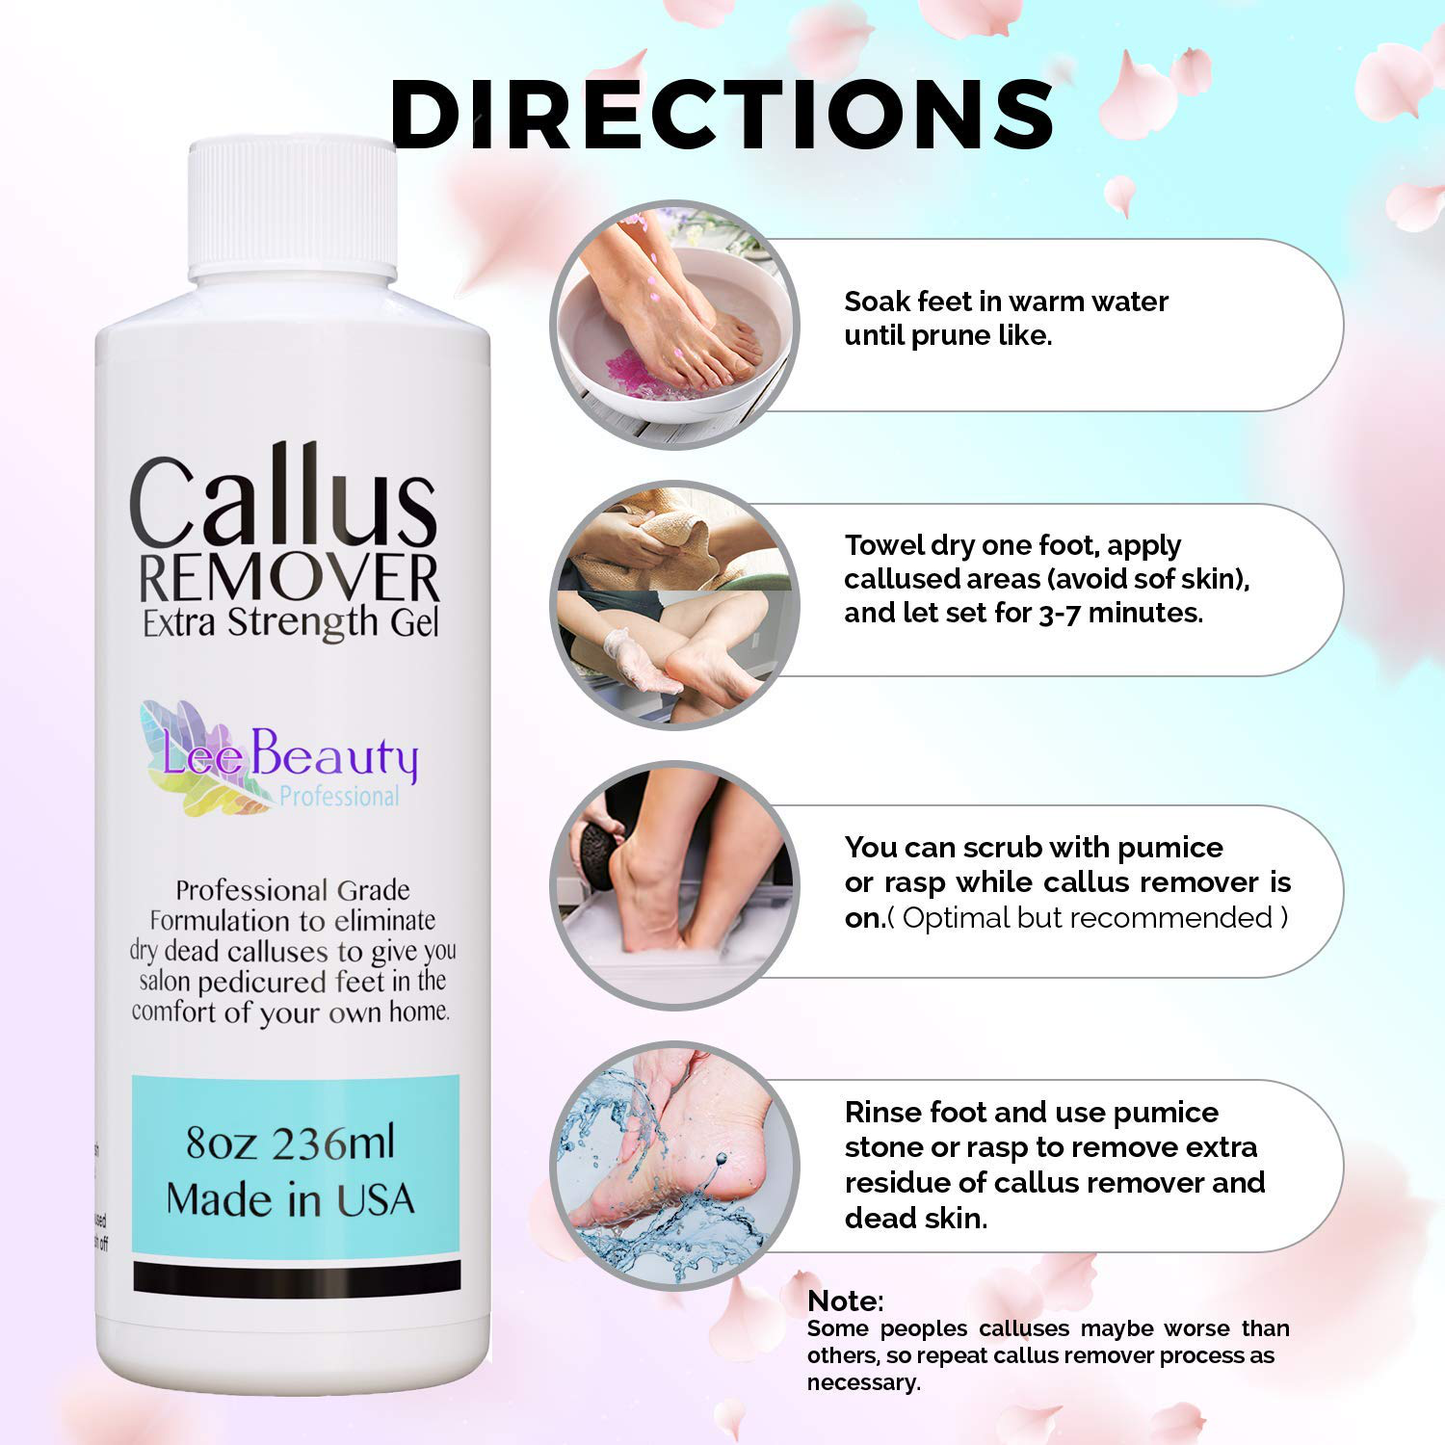 8oz Callus Remover gel for feet for a professional pedicure. Better results than, foot file, pumice stone, foot scrubber, foot buckets & callus shaver. Rid ugly callouses from feet in minutes